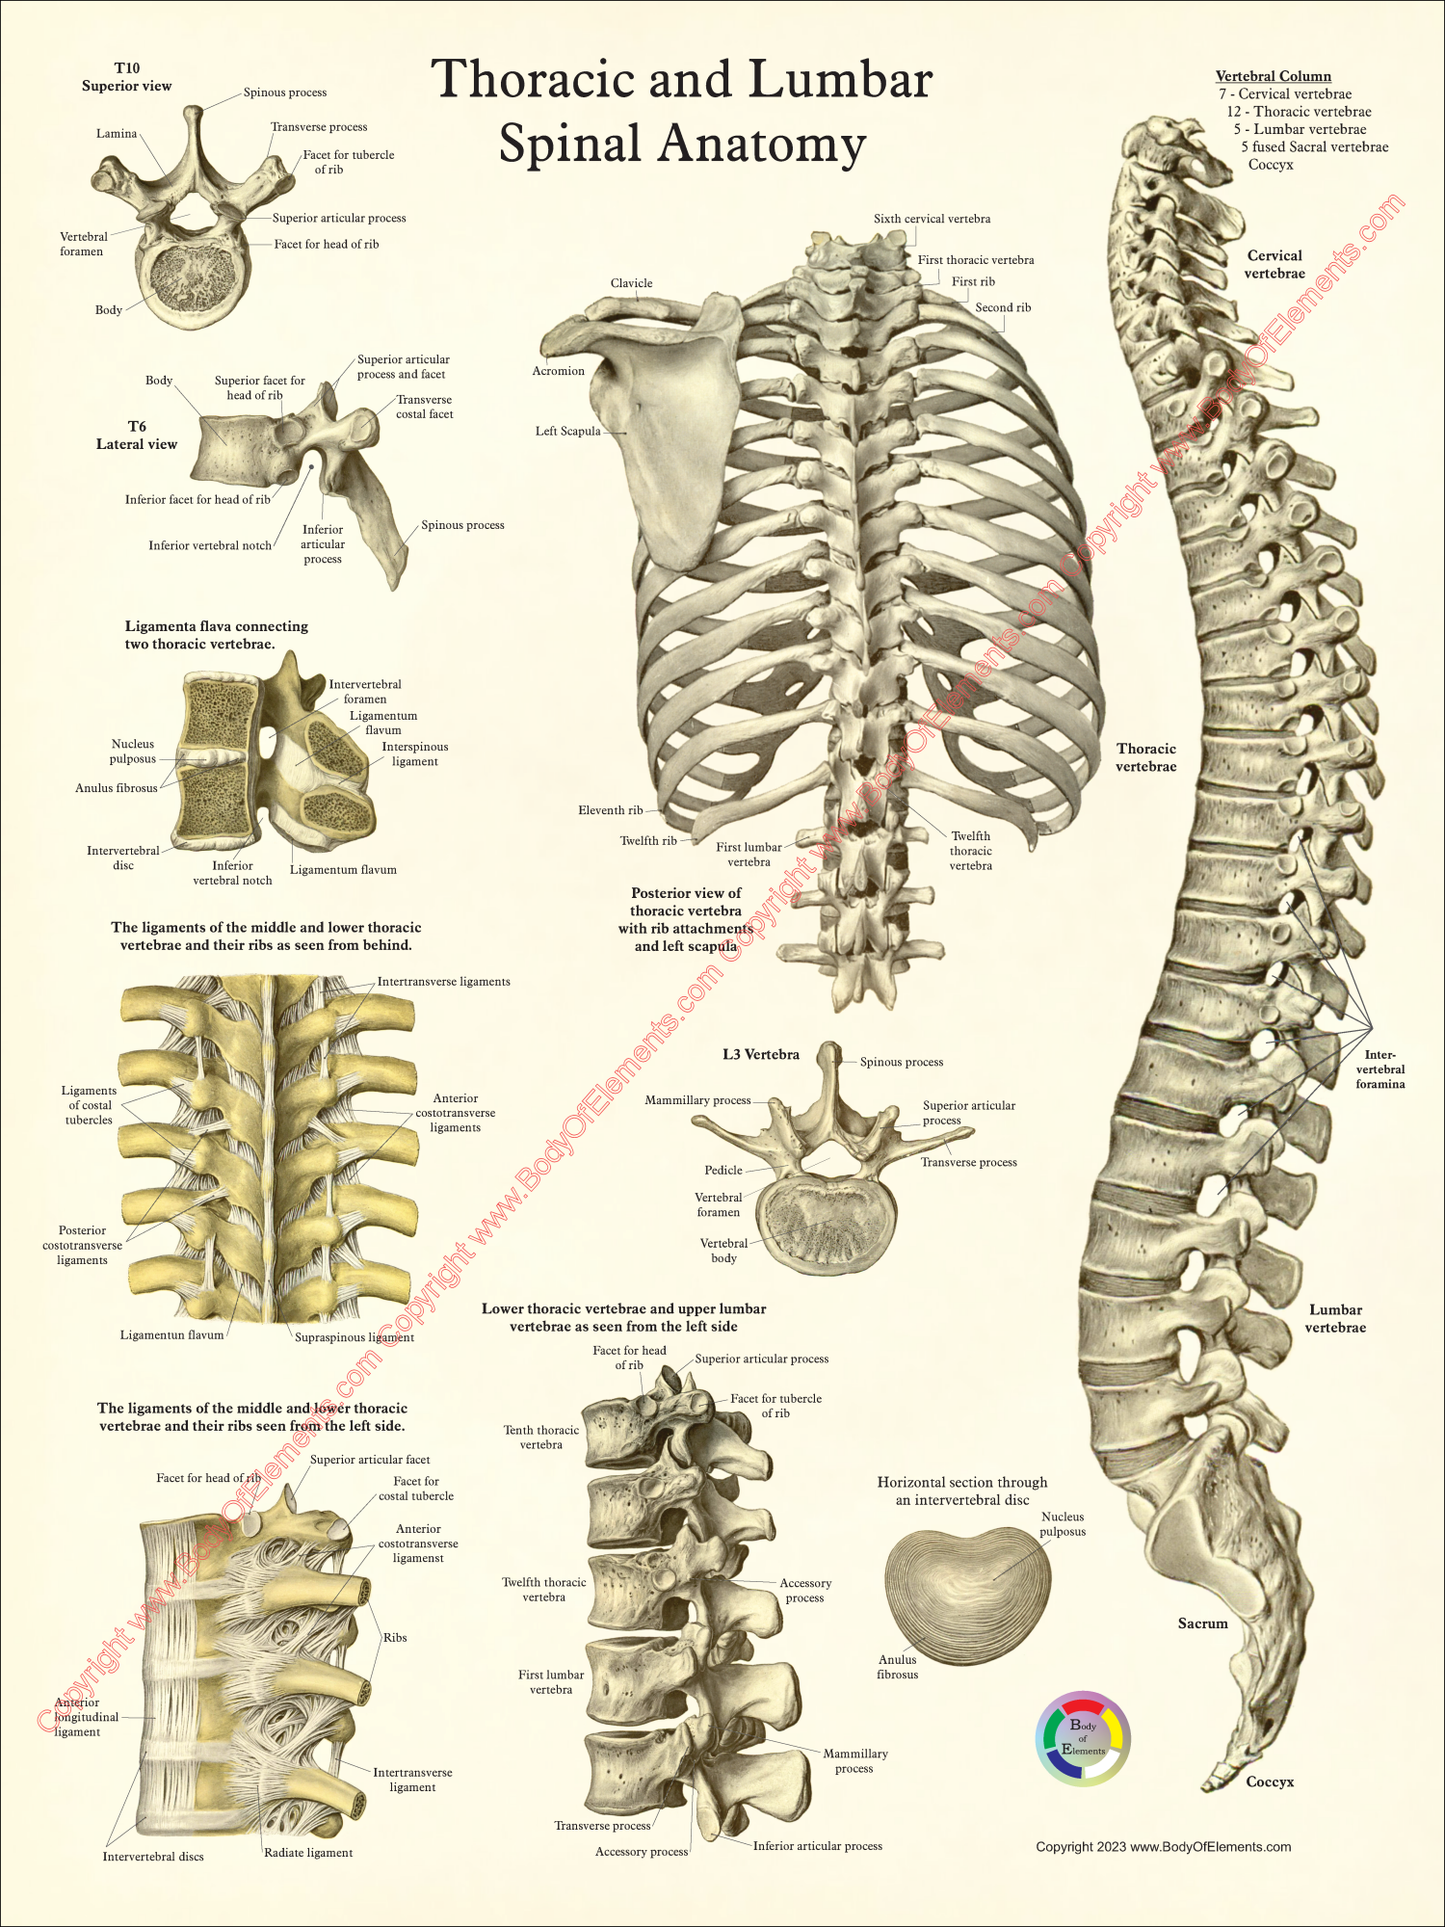 Thoracic spine bones and ligaments anatomical chart